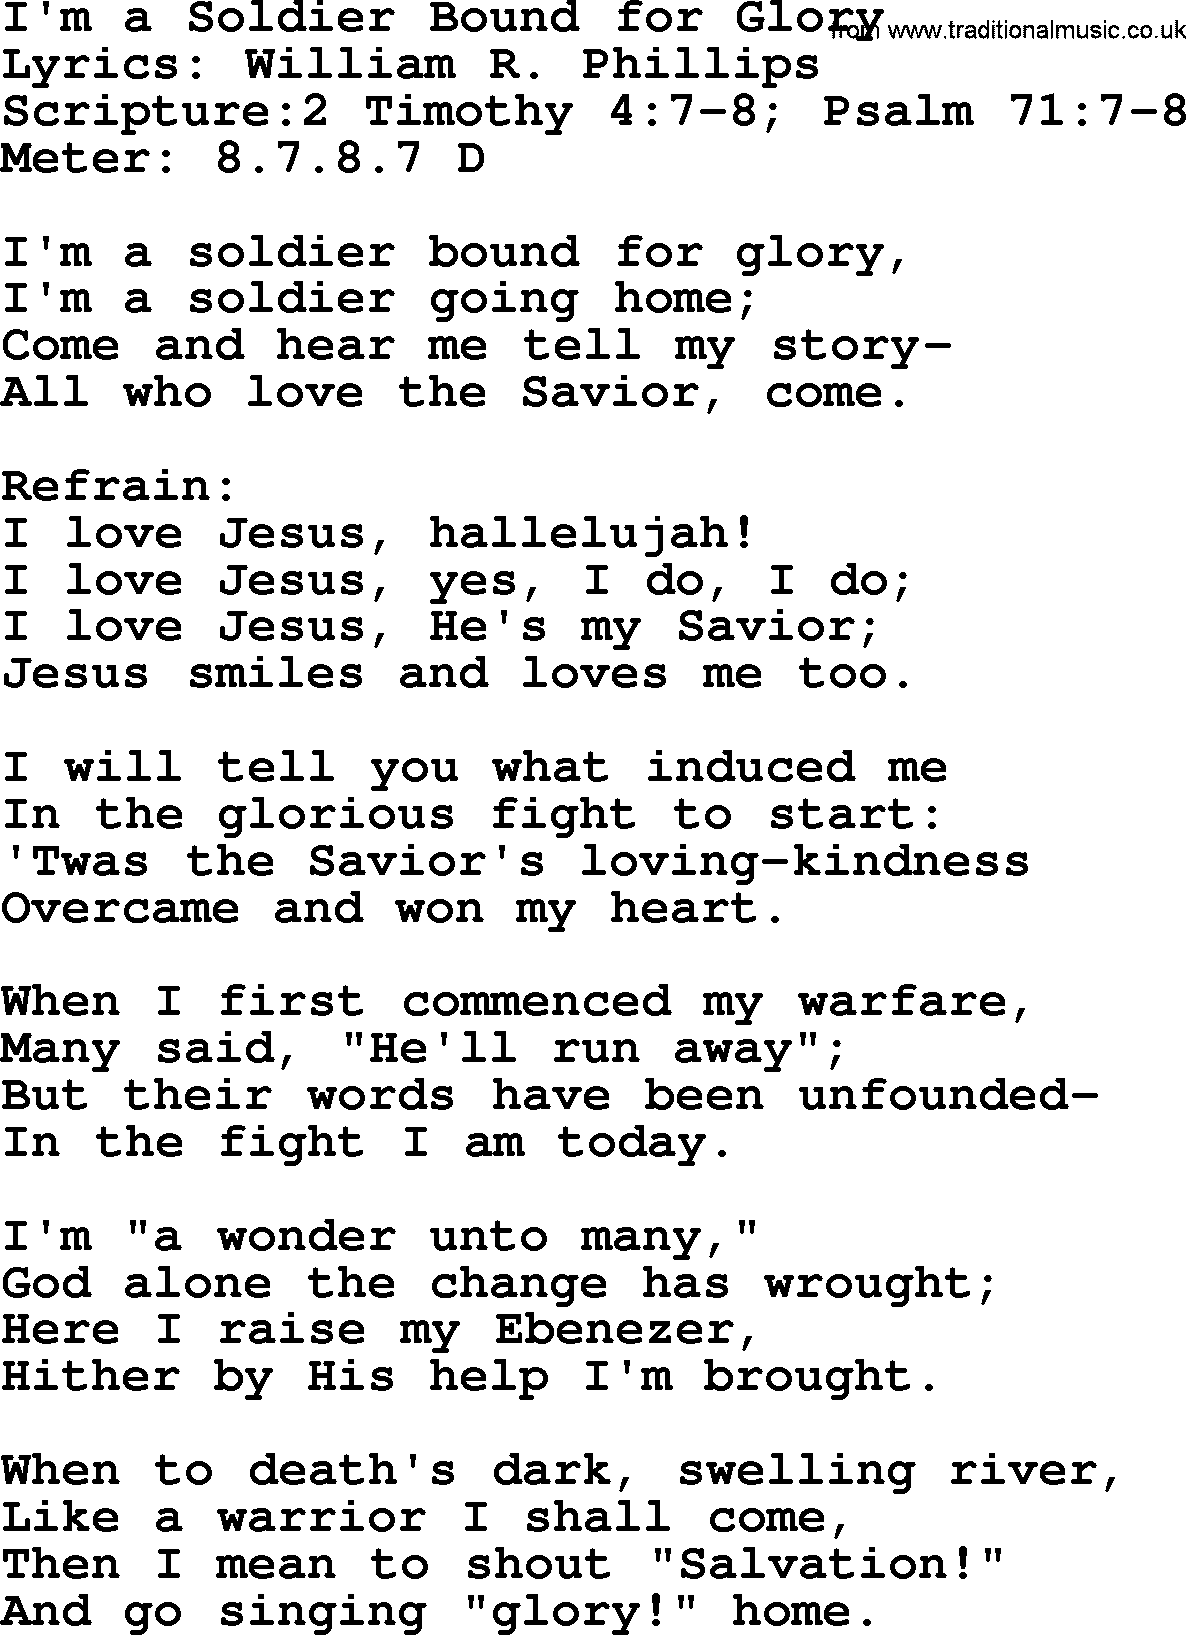 Hymns about  Angels, Hymn: I'm a Soldier Bound for Glory, lyrics, sheet music, midi & Mp3 music with PDF